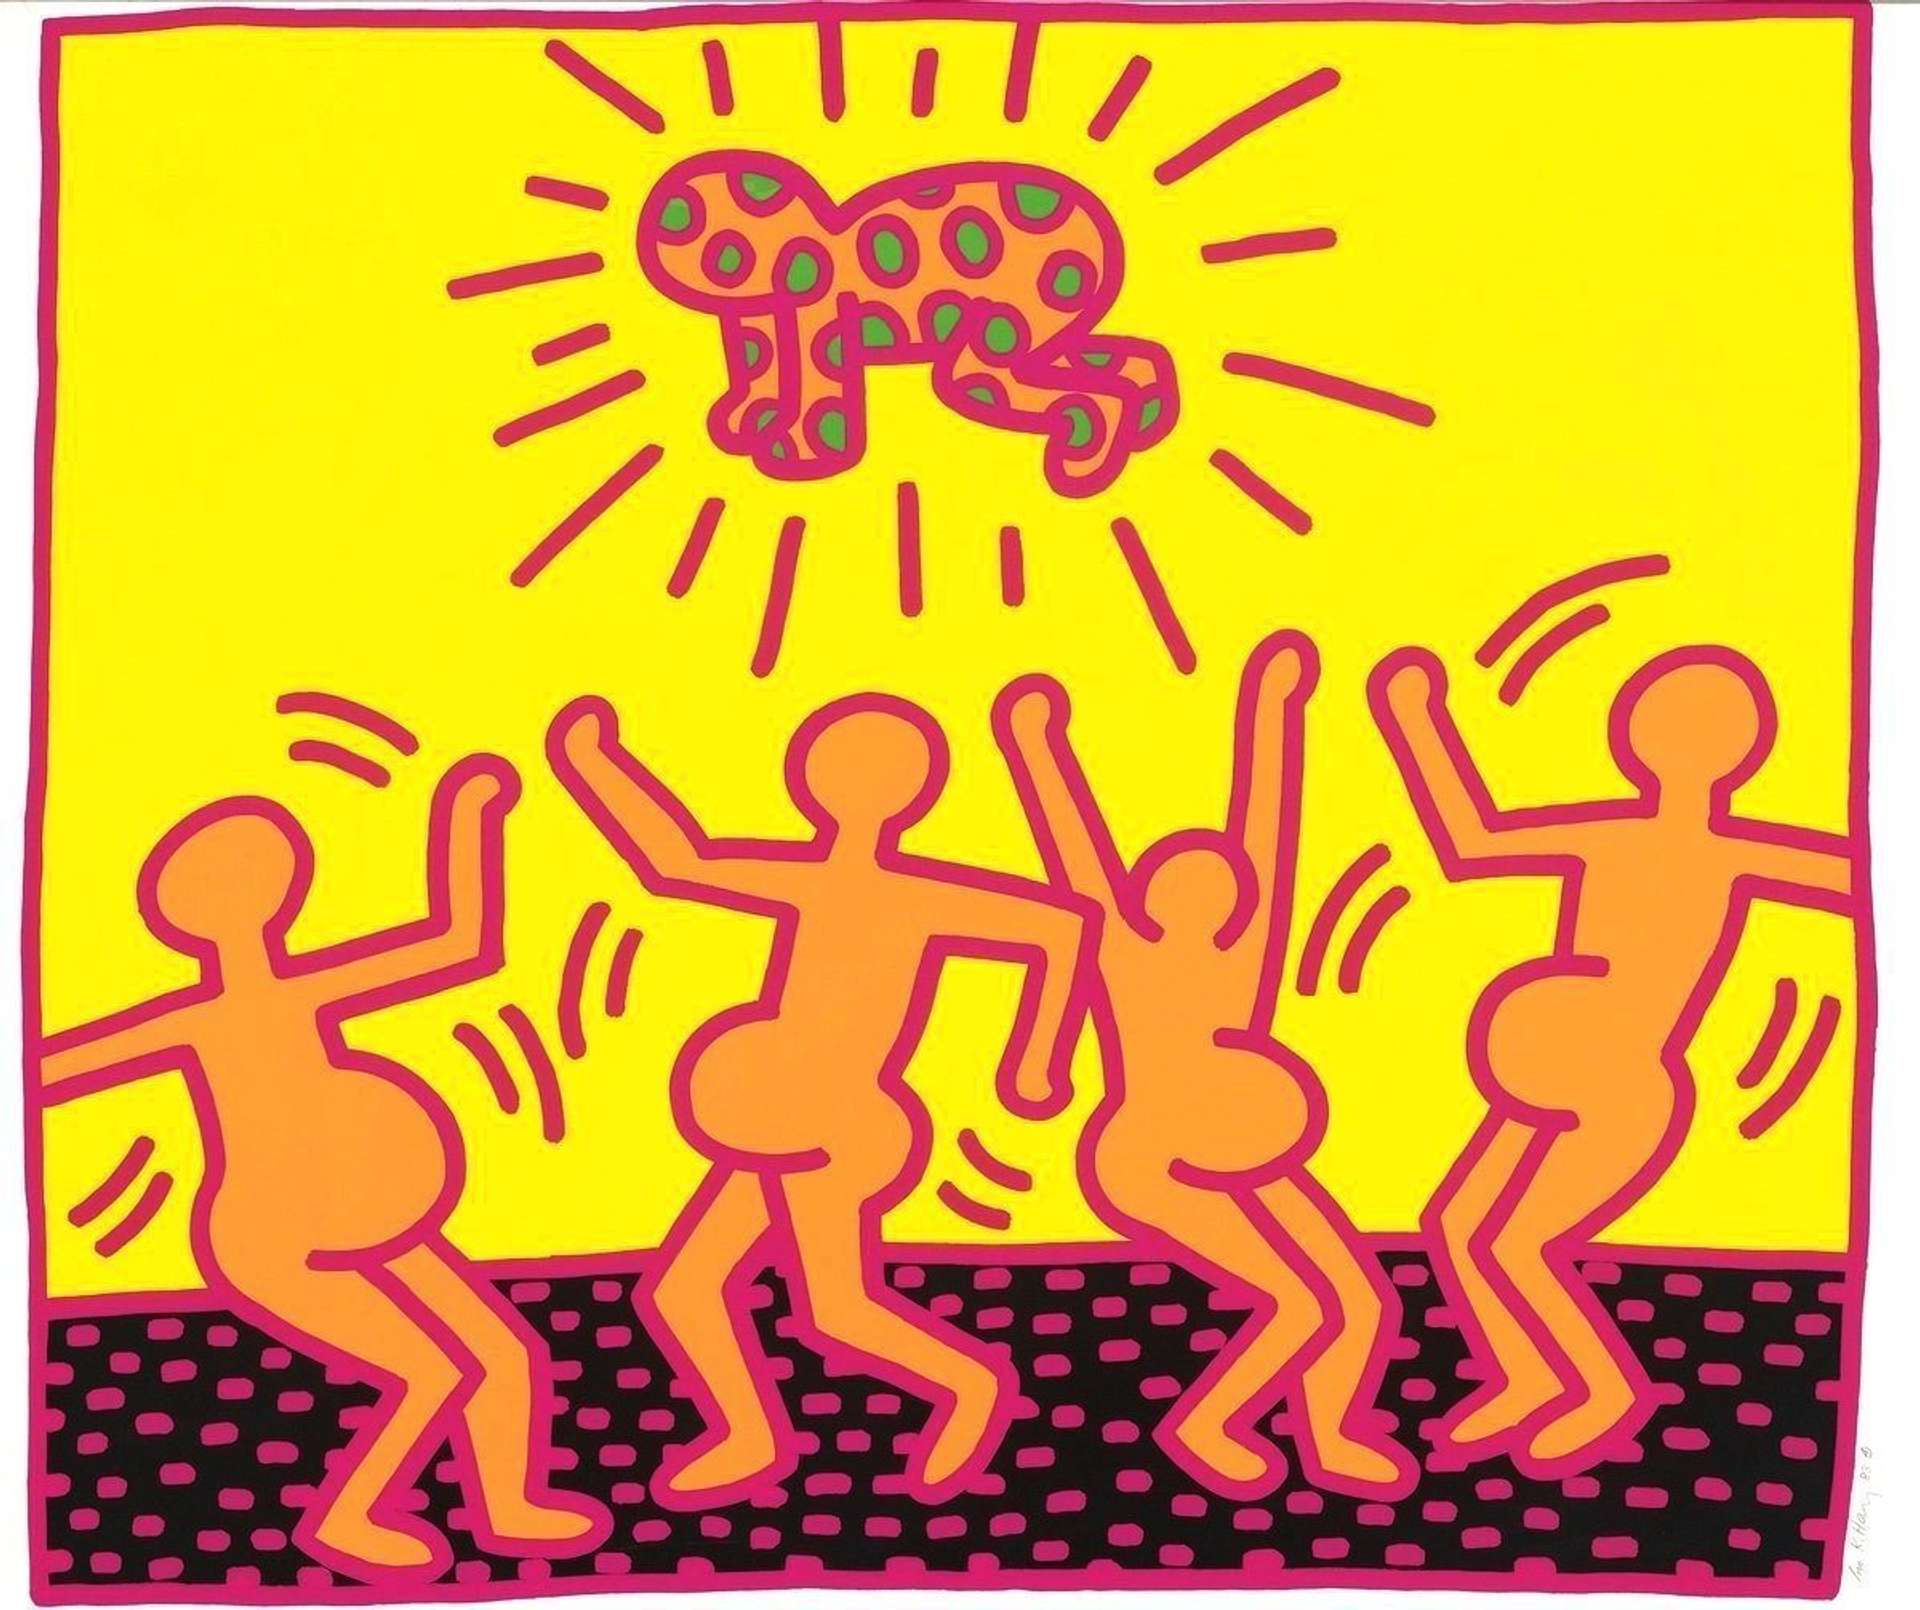 Fertility 1 by Keith Haring